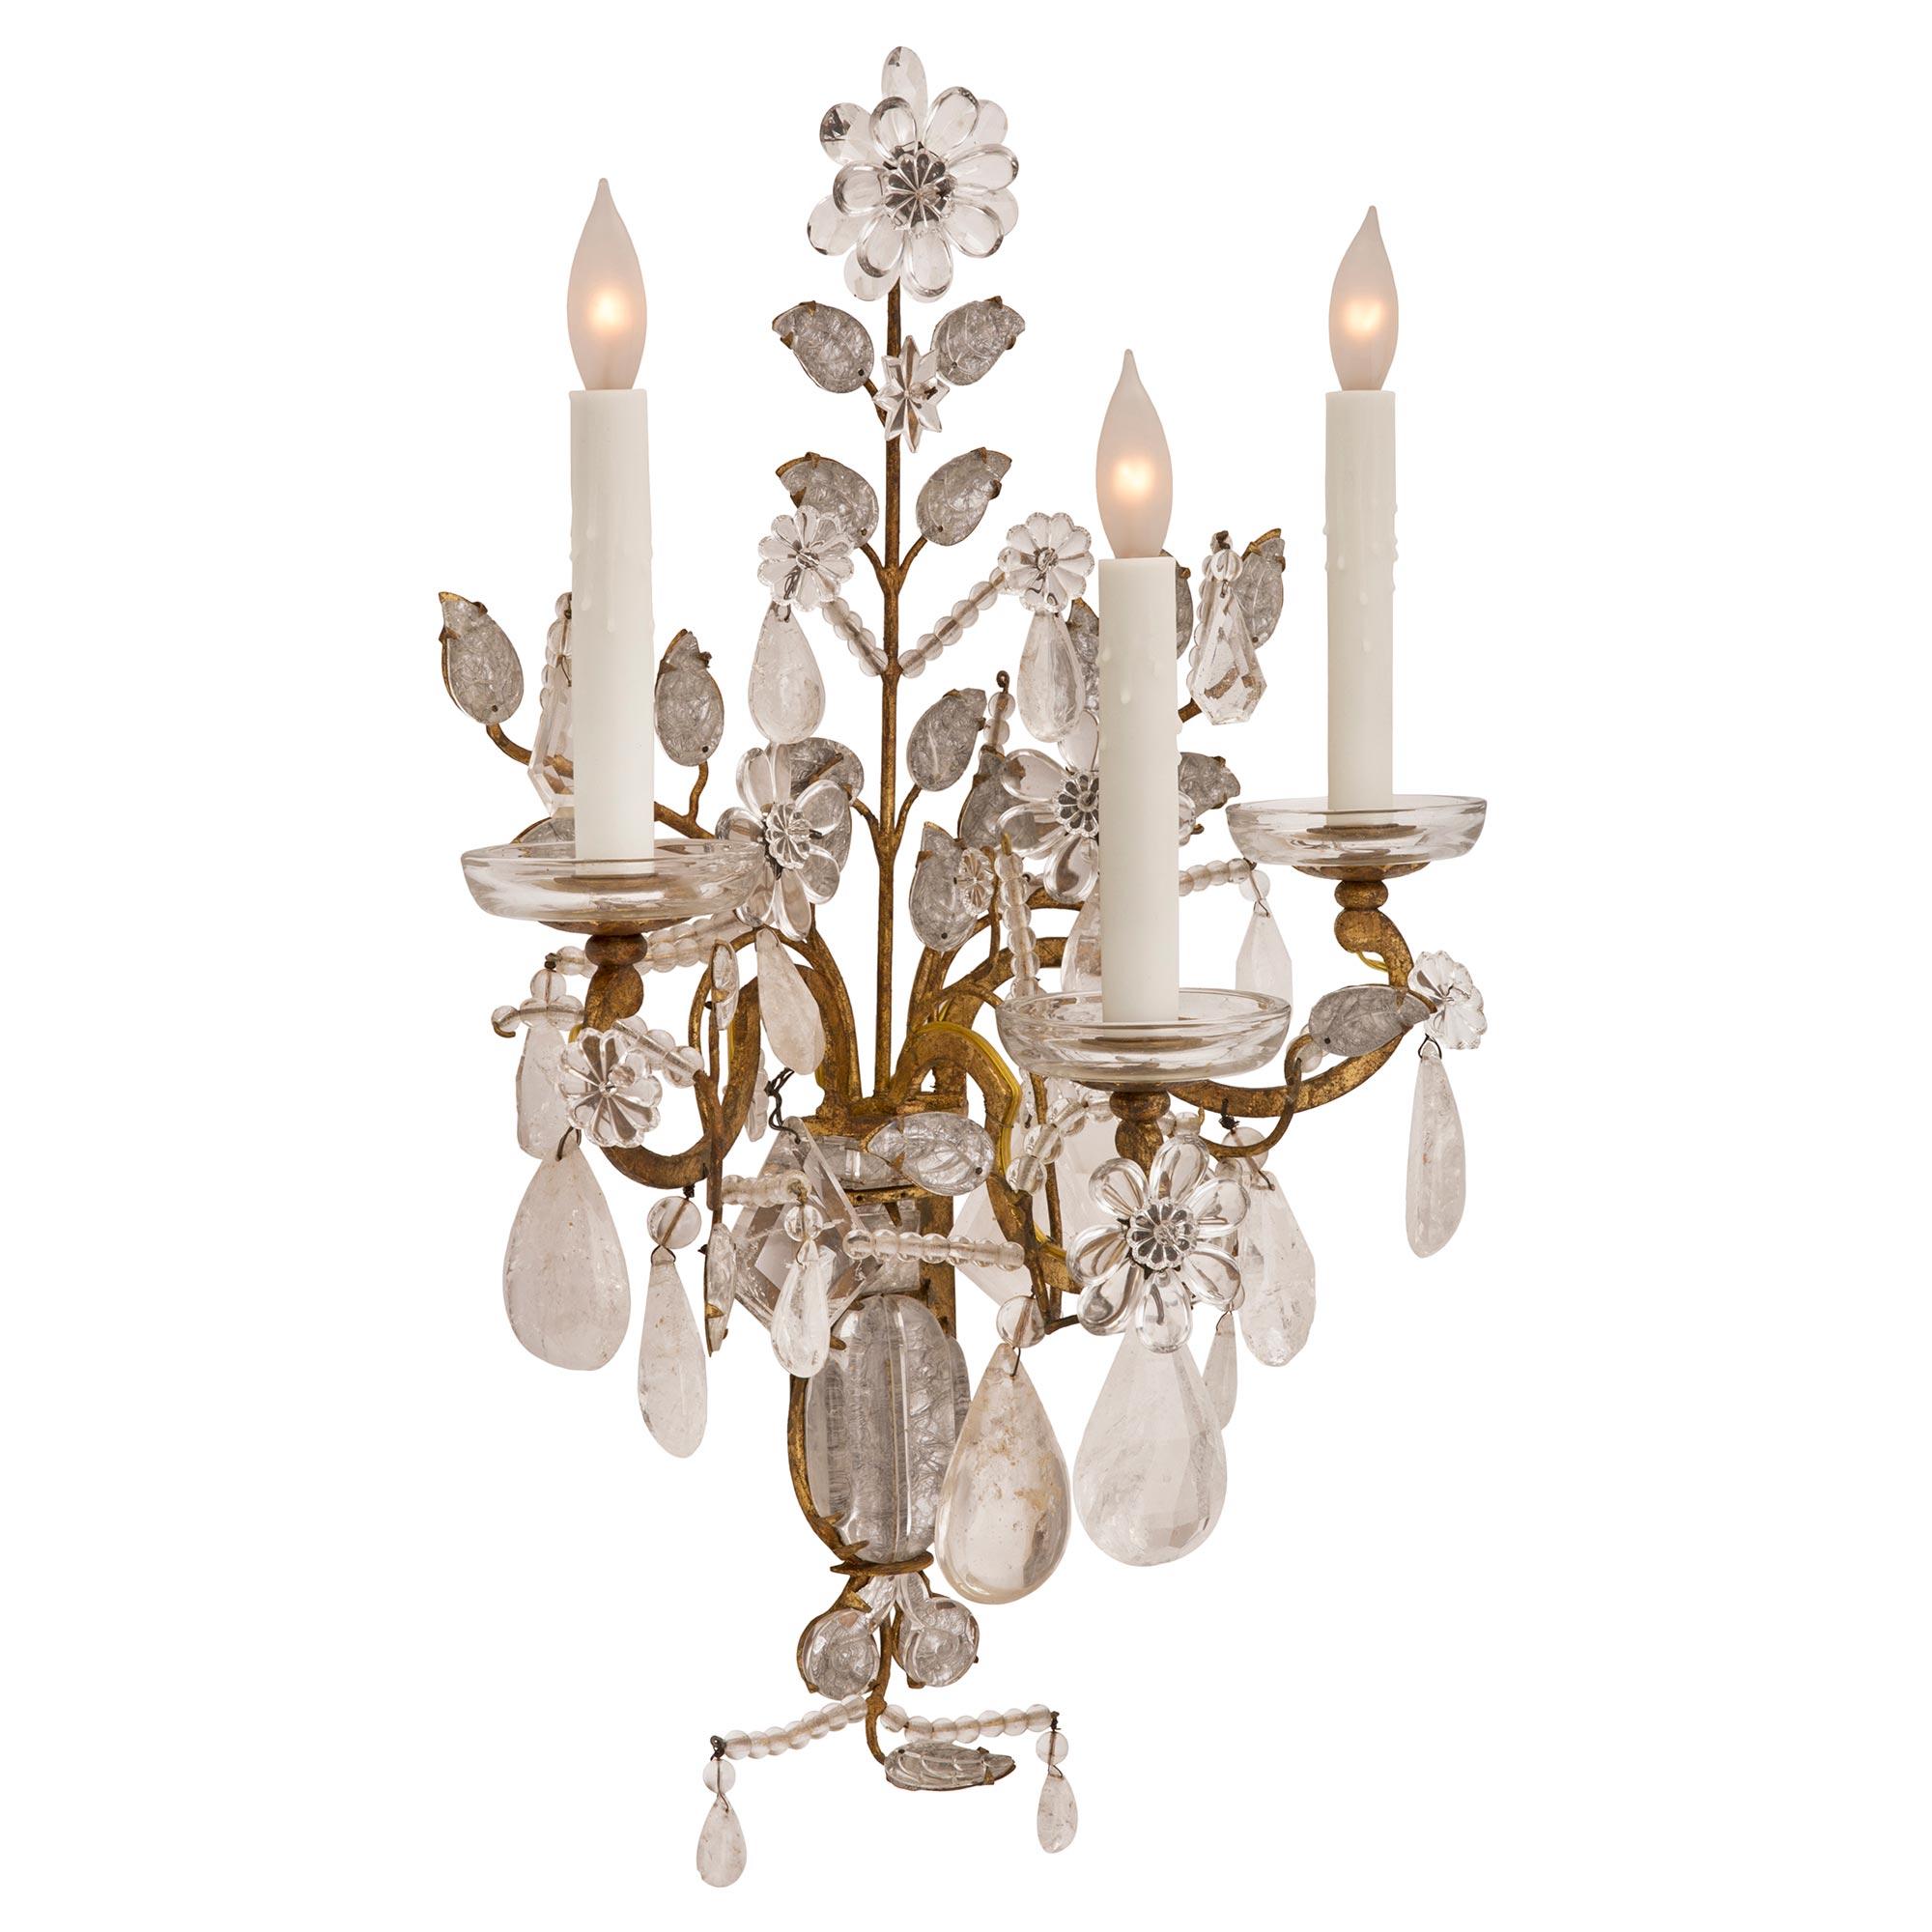 A charming and most decorative pair of French turn of the century Louis XVI st. crystal, rock crystal, and gilt metal sconces attributed to Maison Baguès. Each three arm sconce is centered by lovely leaf and beaded designs below the beautiful gilt